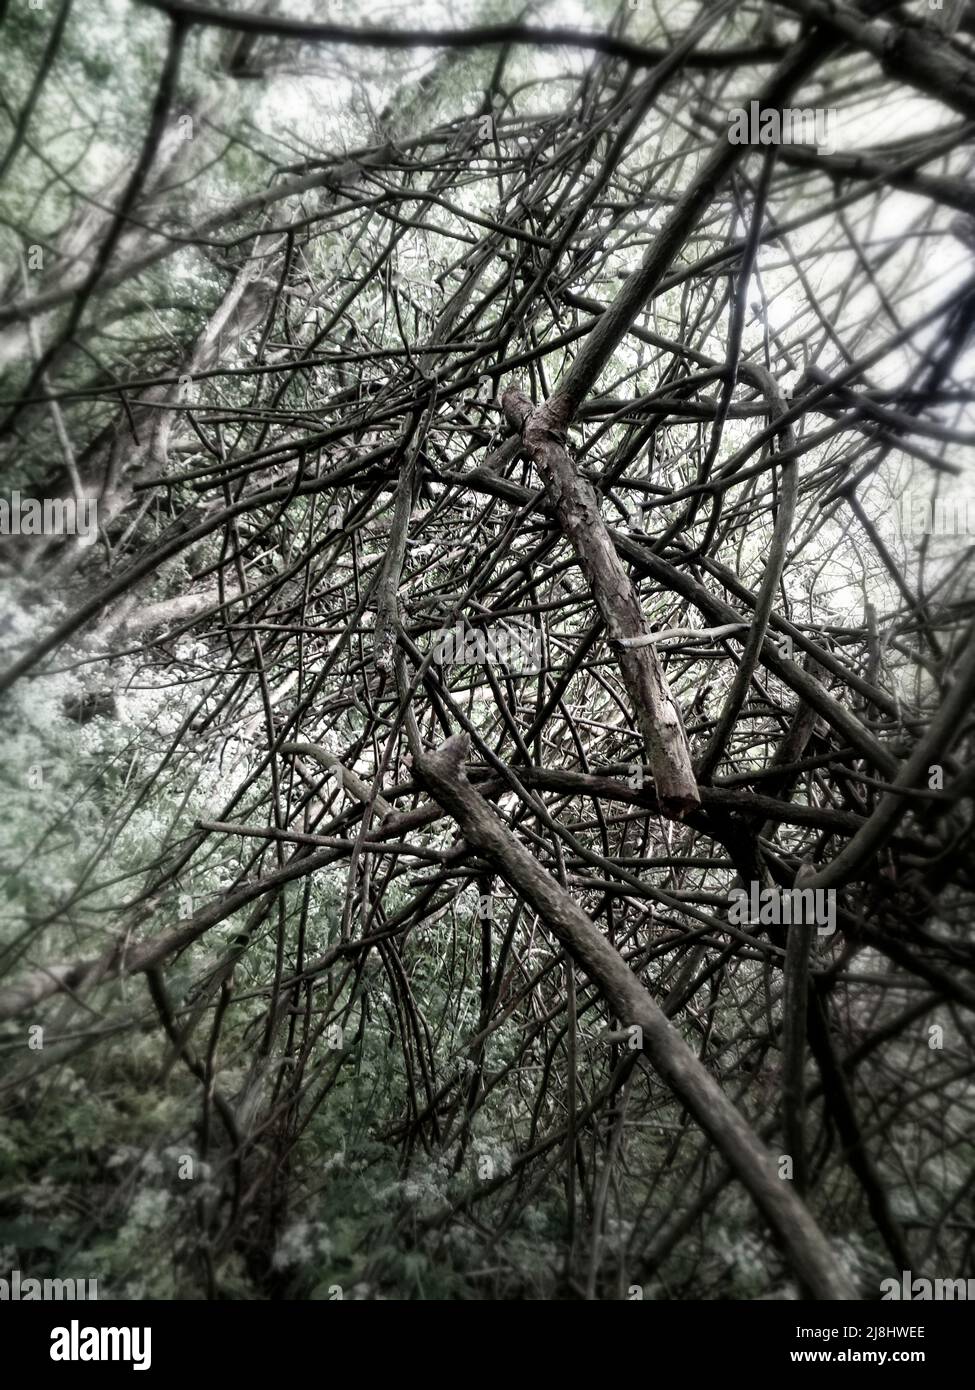 Chaos in nature represented by tangle of branches seemingly randomly  curving around and beyond each other Stock Photo - Alamy